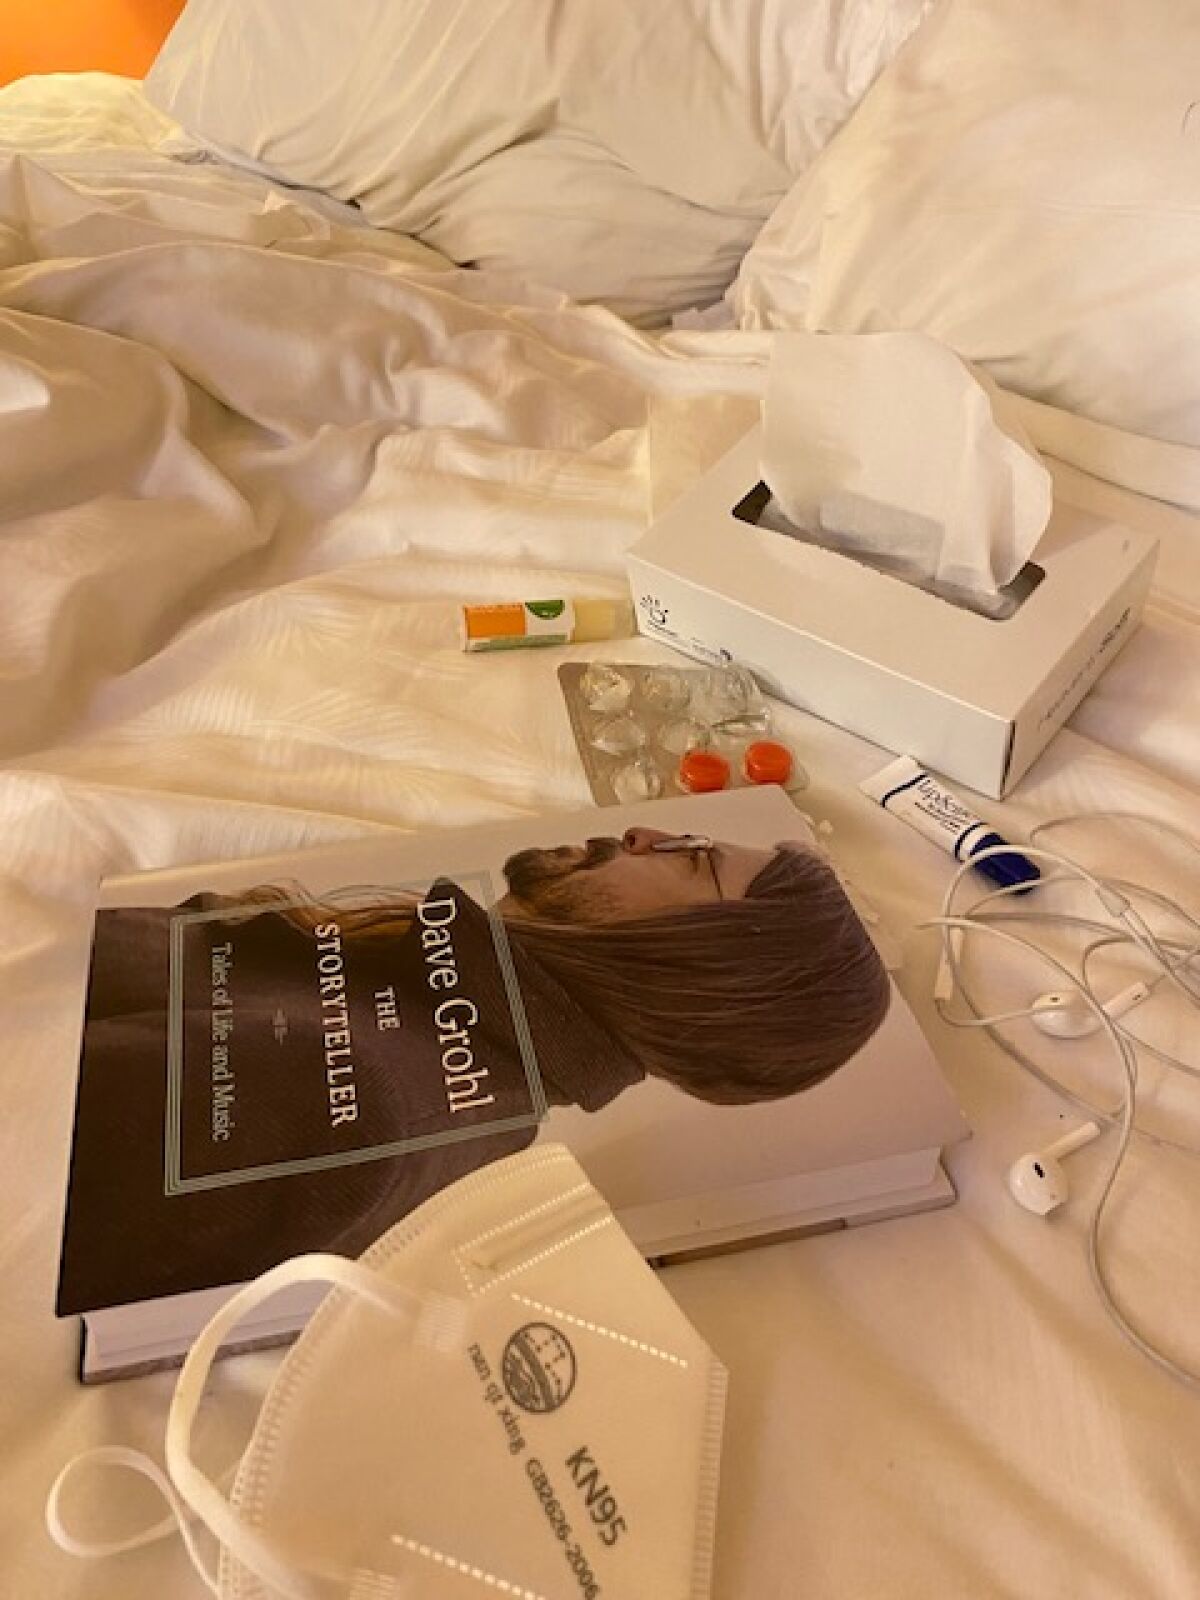 Cough drops, tissues, KN95 mask and the book "Dave Grohl: The Story Teller" on an unmade bed.